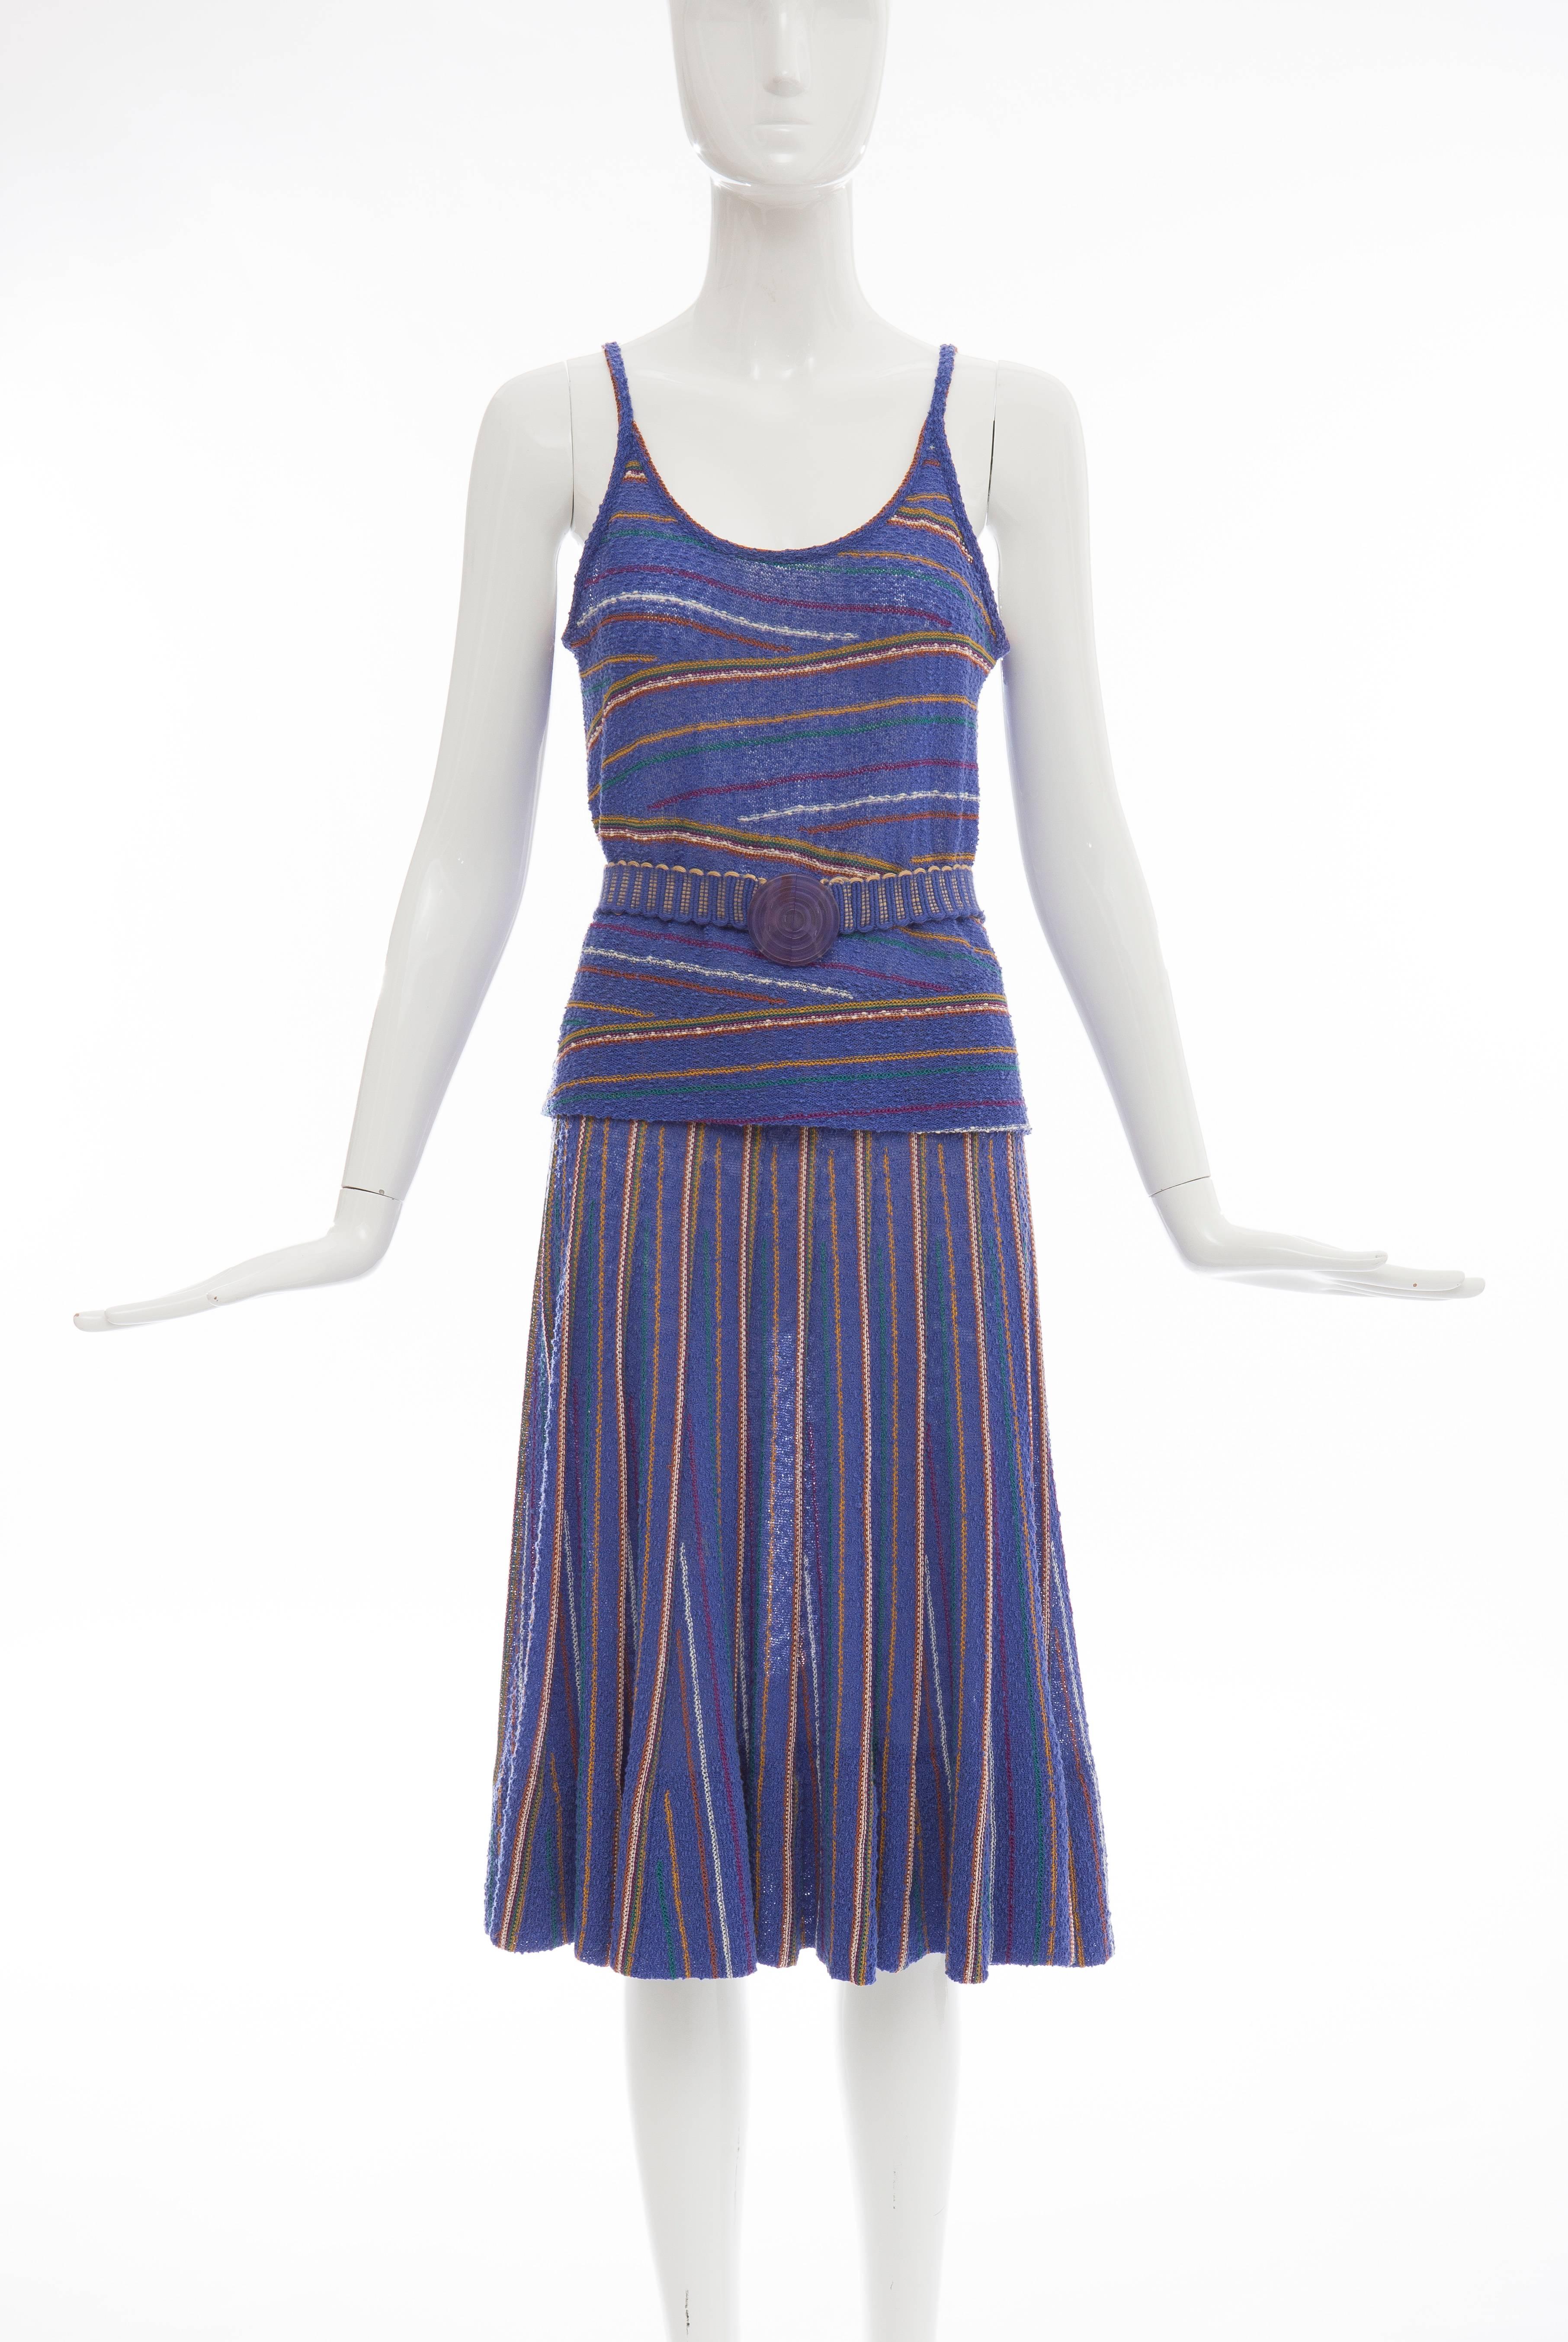 Missoni,  made in Italy for Bonwit Teller, circa 1970's, wool nylon and linen skirt suit, elastic waist with knit belt and deco buckle marked Missoni.

IT. Medium
Skirt: IT. 44

US. 8

Waist: 26 inch up to 32, Bust 36, 
Skirt Length 25inch 
Knit